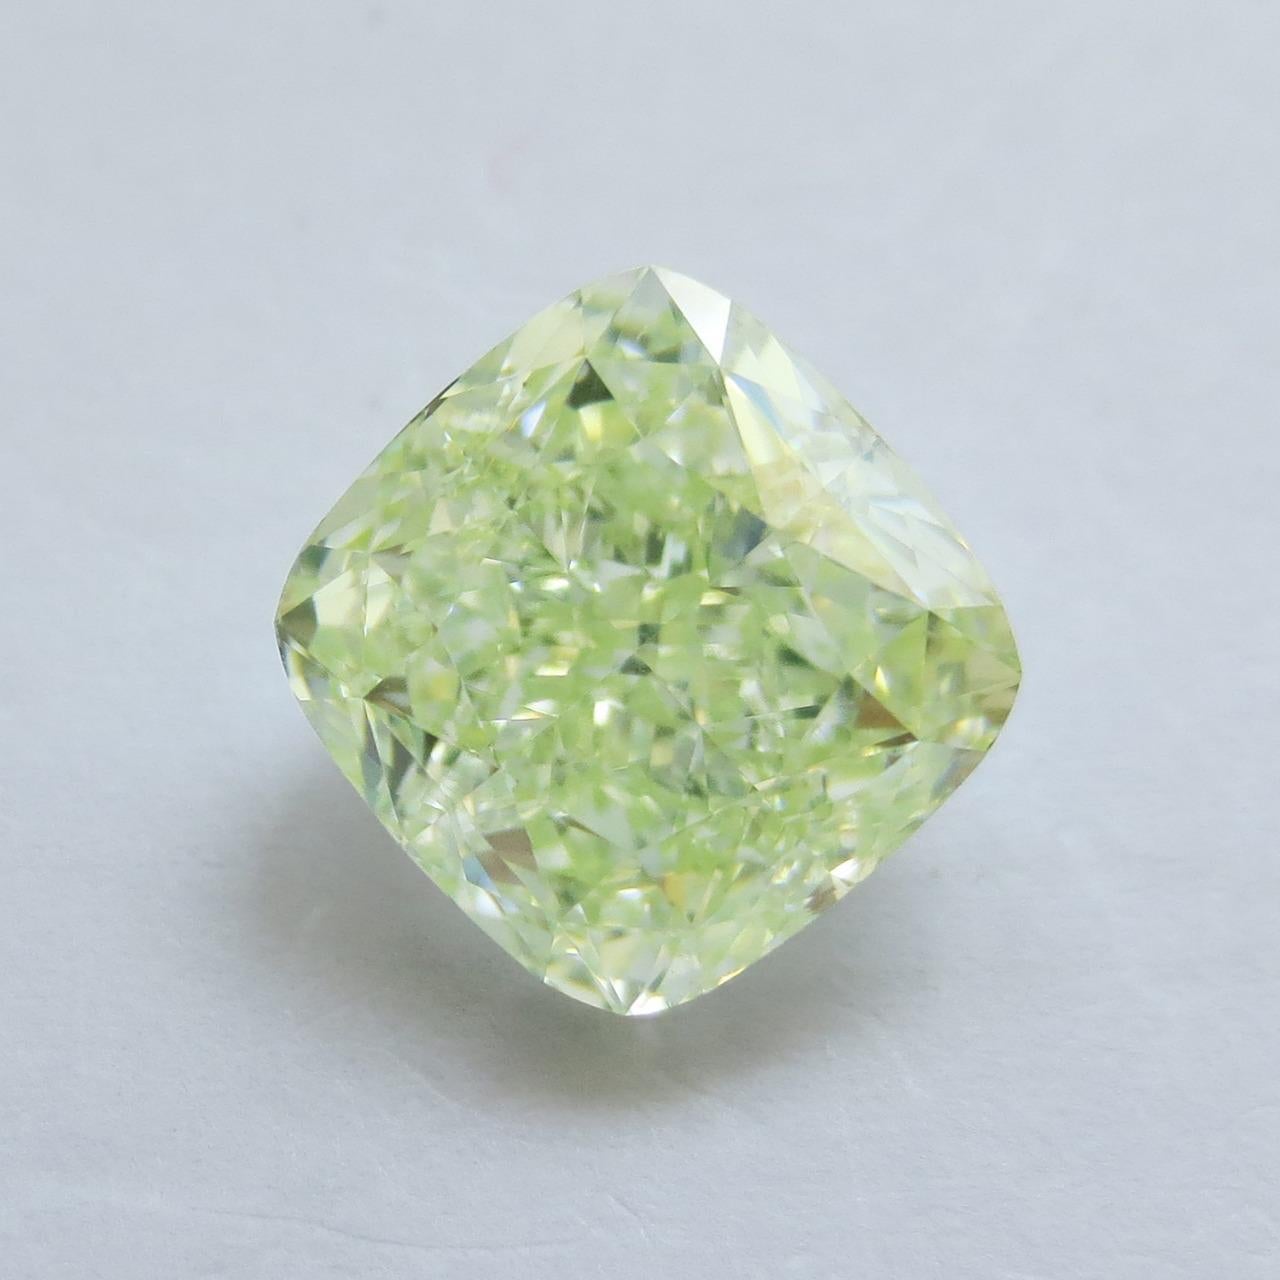 From the Emilio Jewelry Vault, We are Showcasing a loose 4.00 carat Gia Certified natural fancy yellow green diamond. We are professionals in creating jewelry to bring out the best in green diamonds. We would love to design your dream ring for this